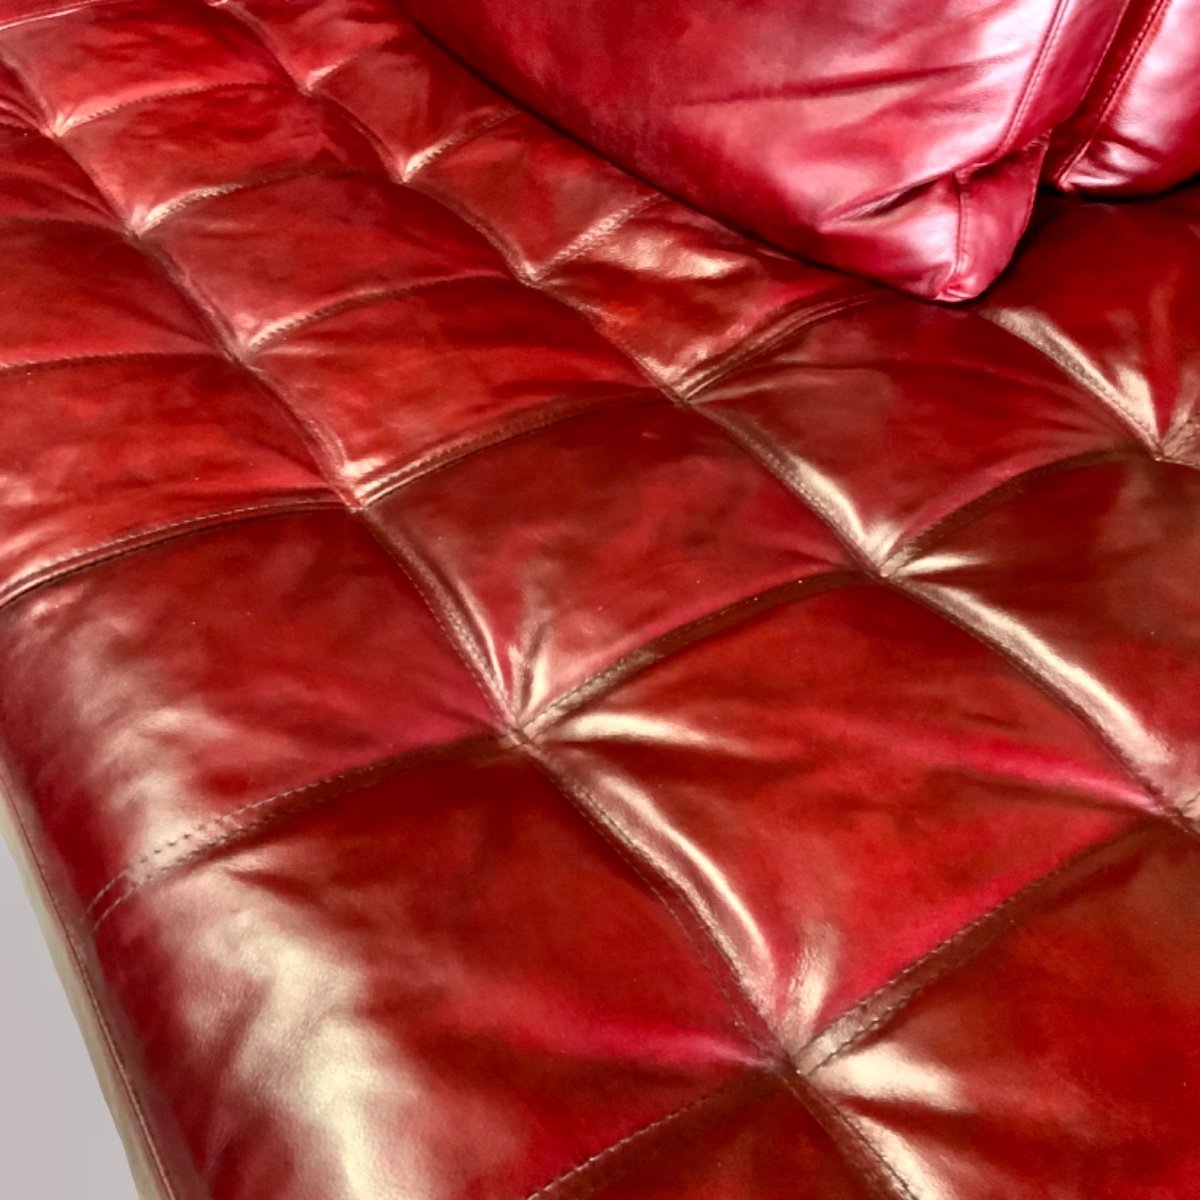 Natuzzi Corner Sofa In Red Leather From The 1980s/90s-photo-8